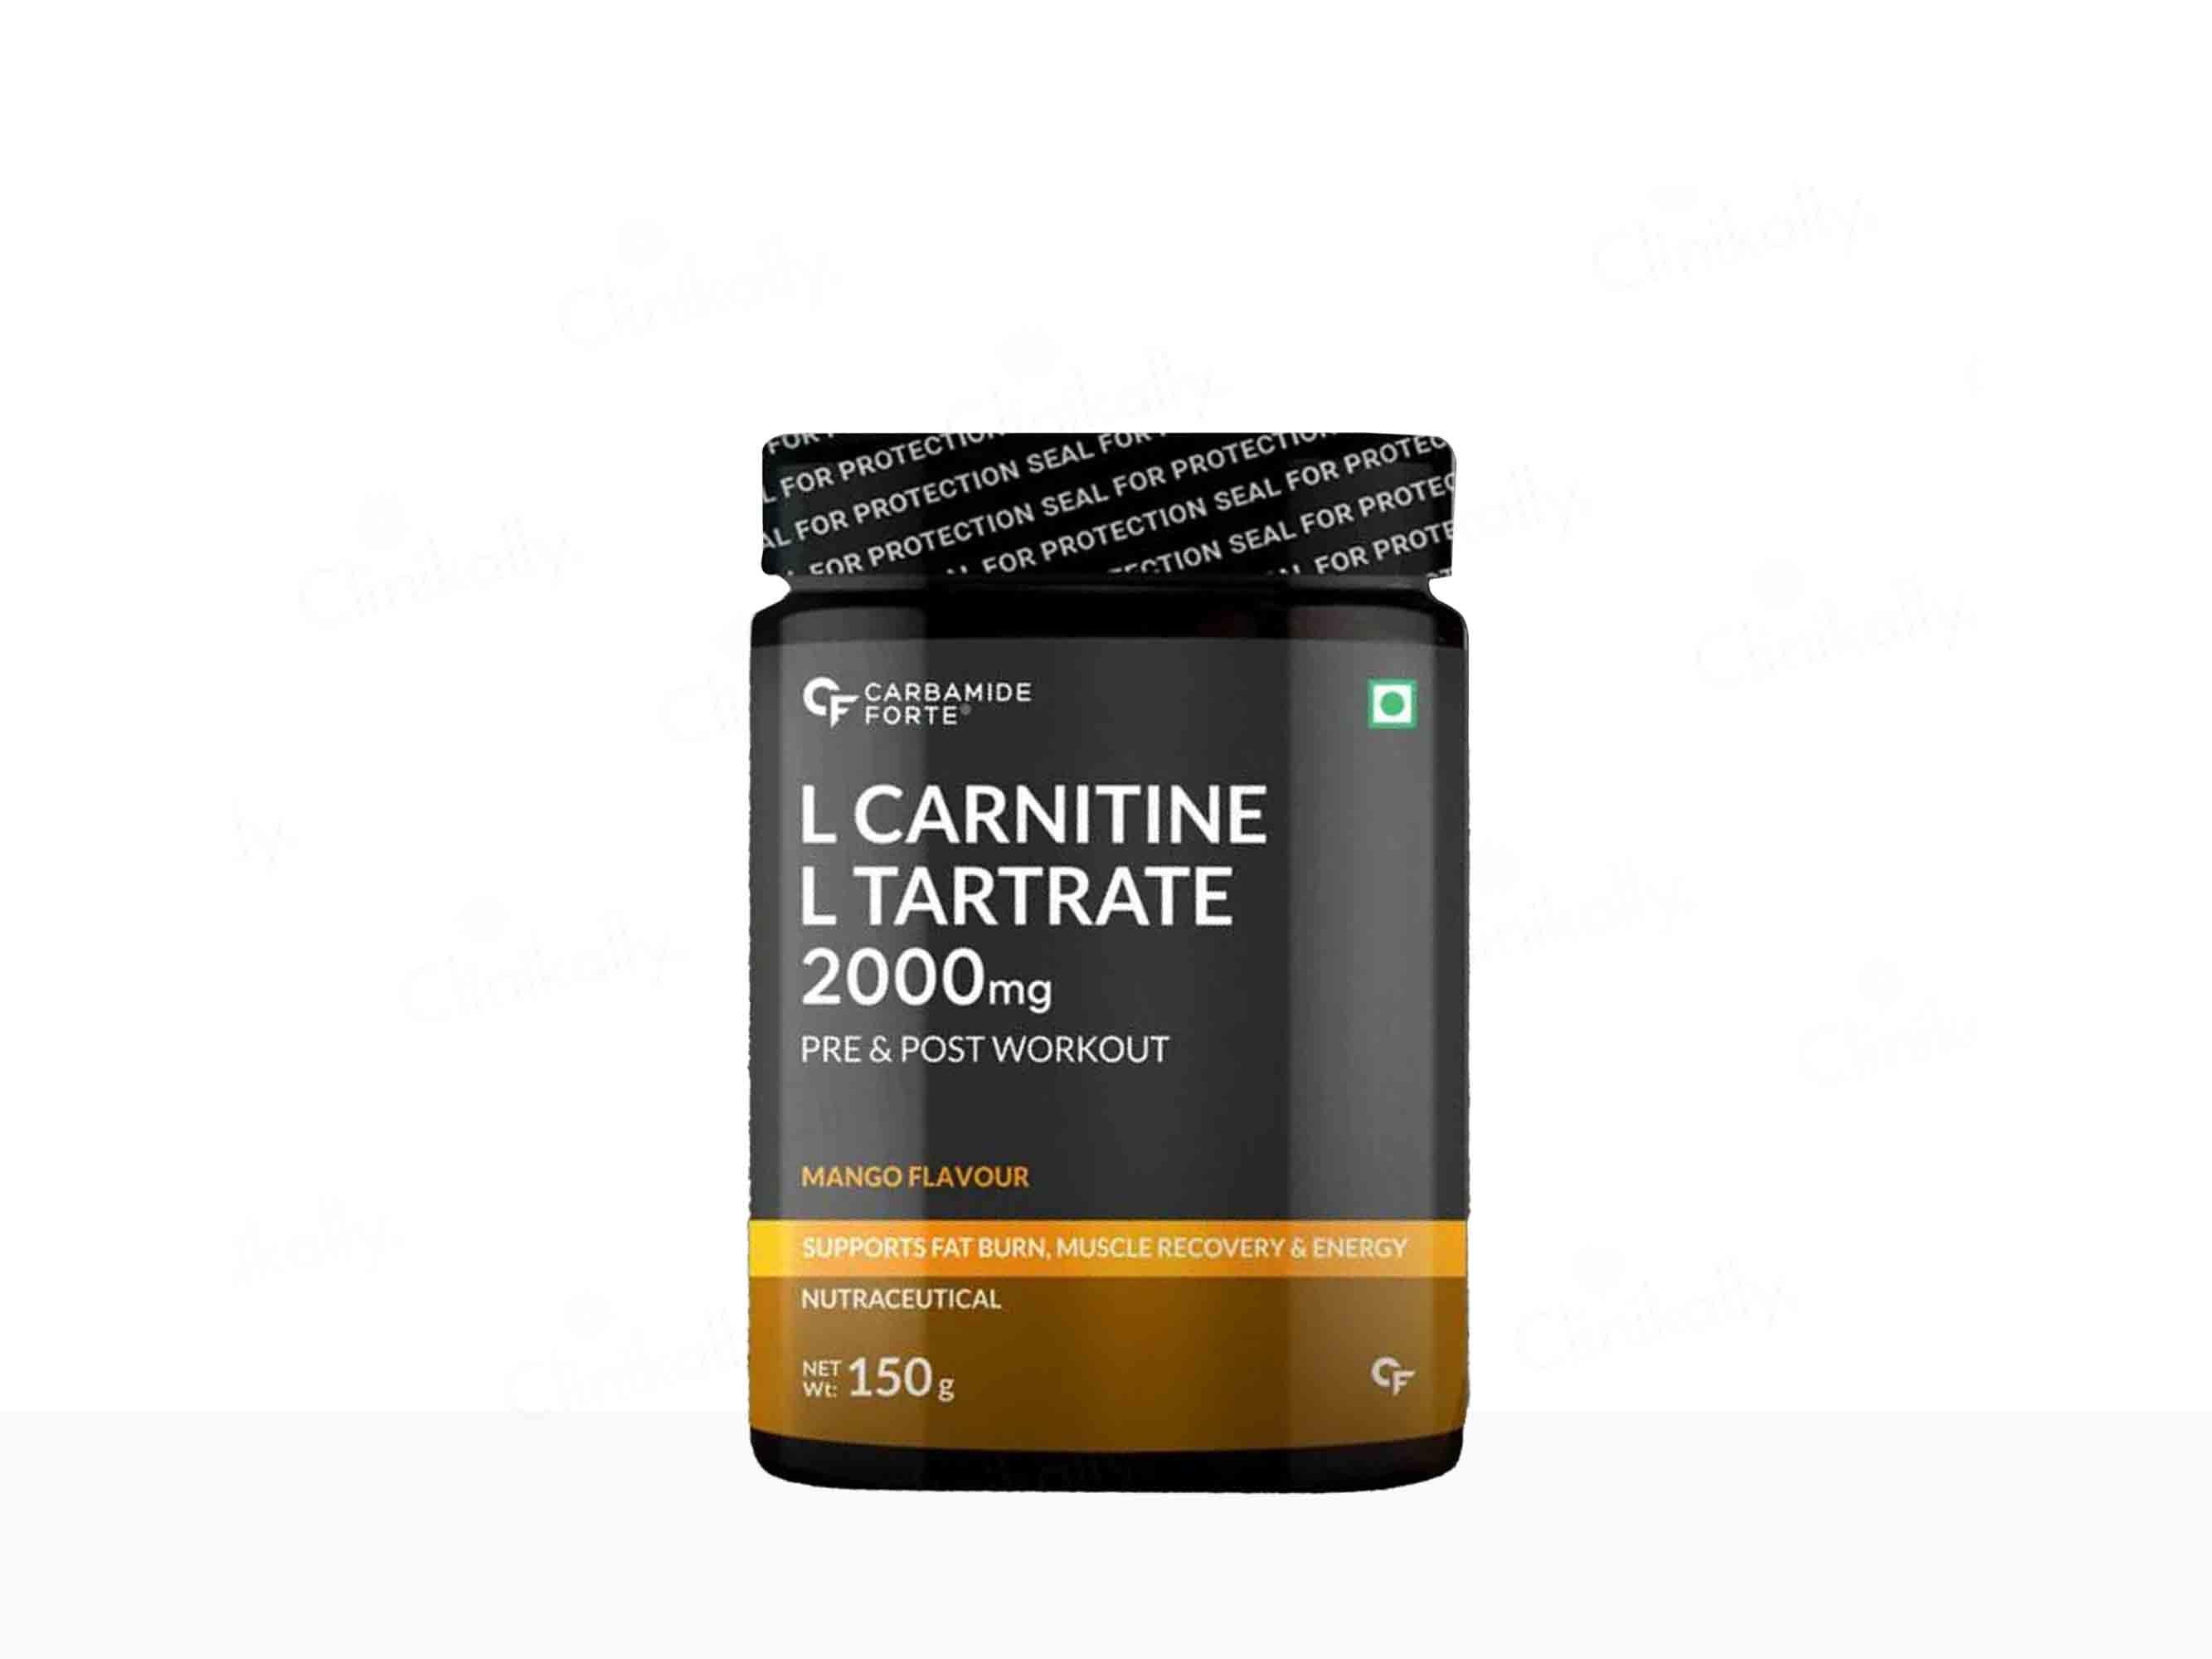 Carbamide Forte L-Carnitine L-Tartrate 2000mg Pre & Post Workout Powder - Mango Flavour